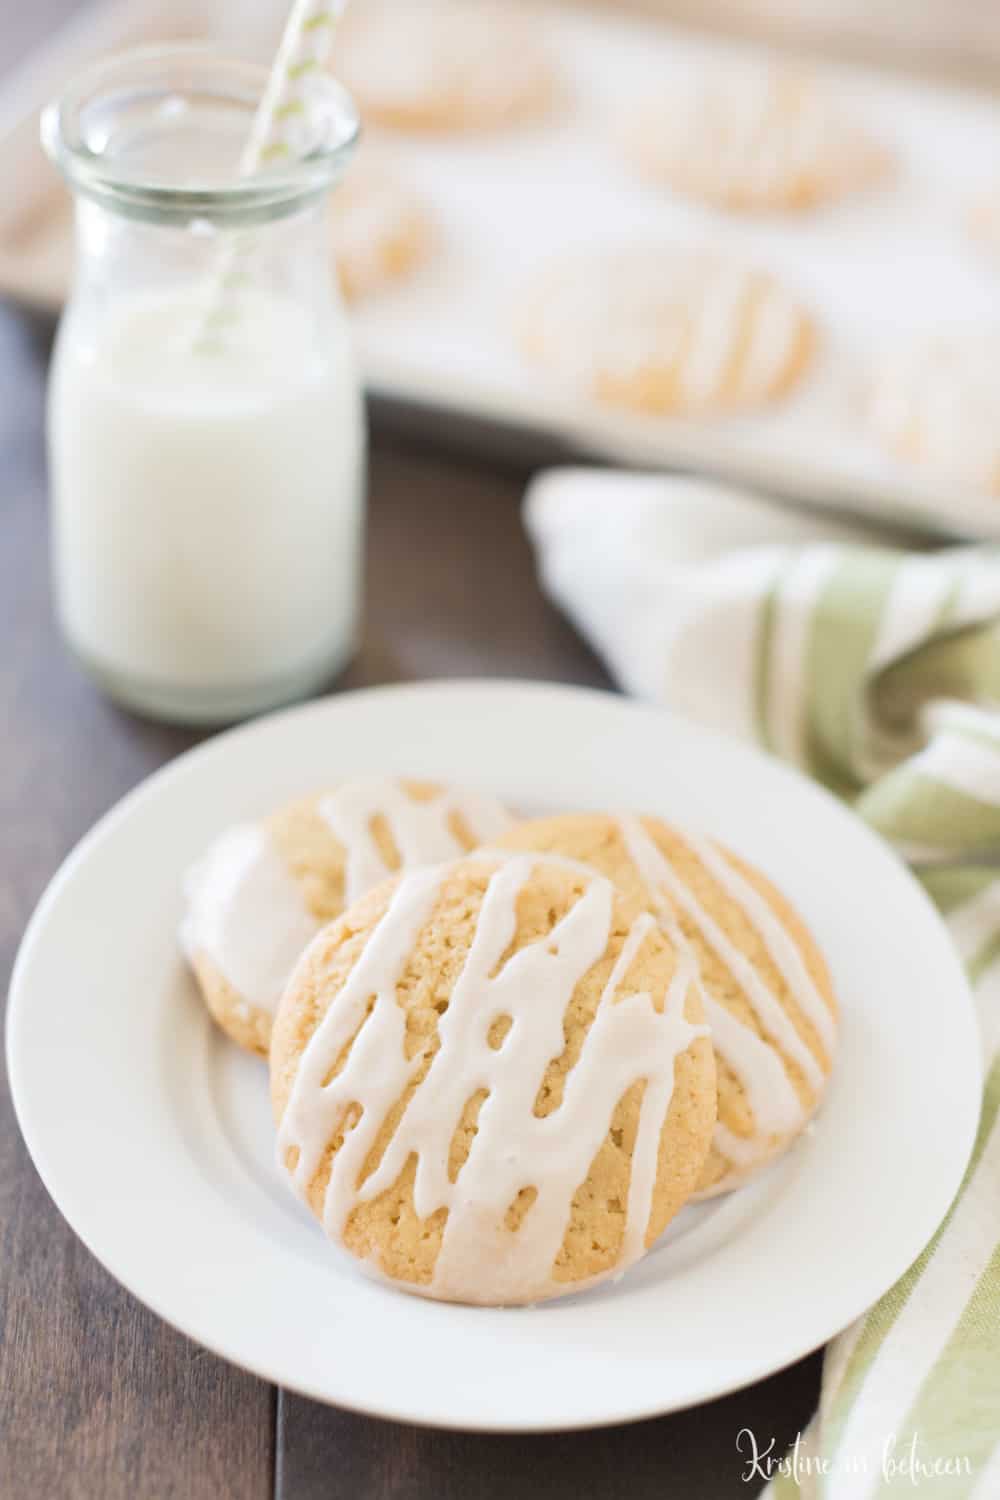 These maple sugar cookies are soft and chewy with a sweet maple glaze! They're quick and easy to make and are the perfect sweet treat!